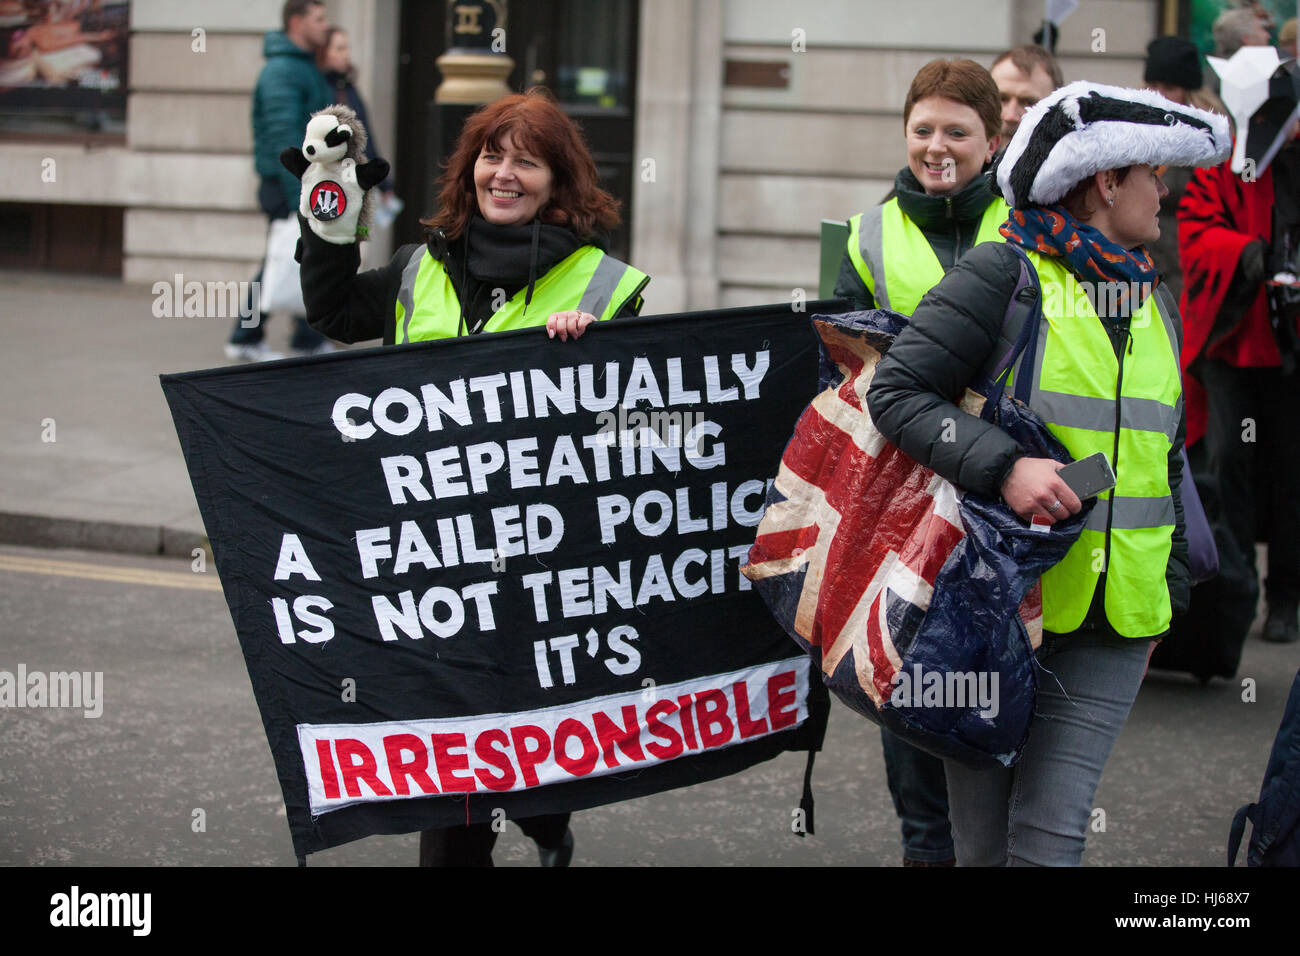 London, UK. 26th January, 2017. Animal rights campaigners march in remembrance of 10,866 badgers killed in the UK during the 2016 season. Credit: Mark Kerrison/Alamy Live News Stock Photo